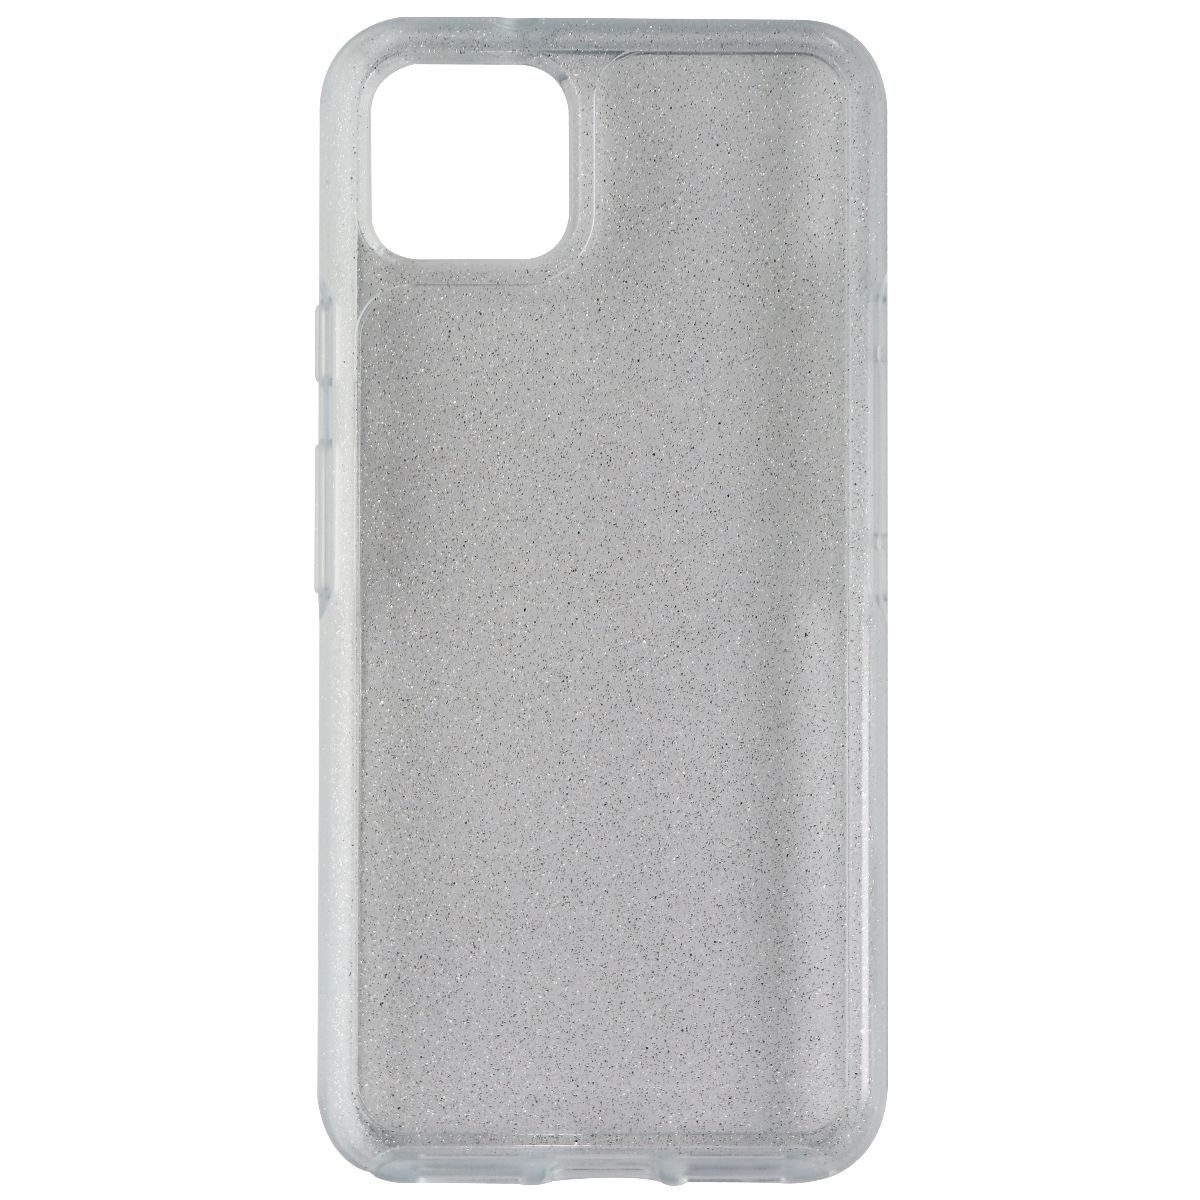 OtterBox Symmetry Series Case for Google Pixel 4 XL Smartphone - Stardust/Clear (Used) - image 2 of 2